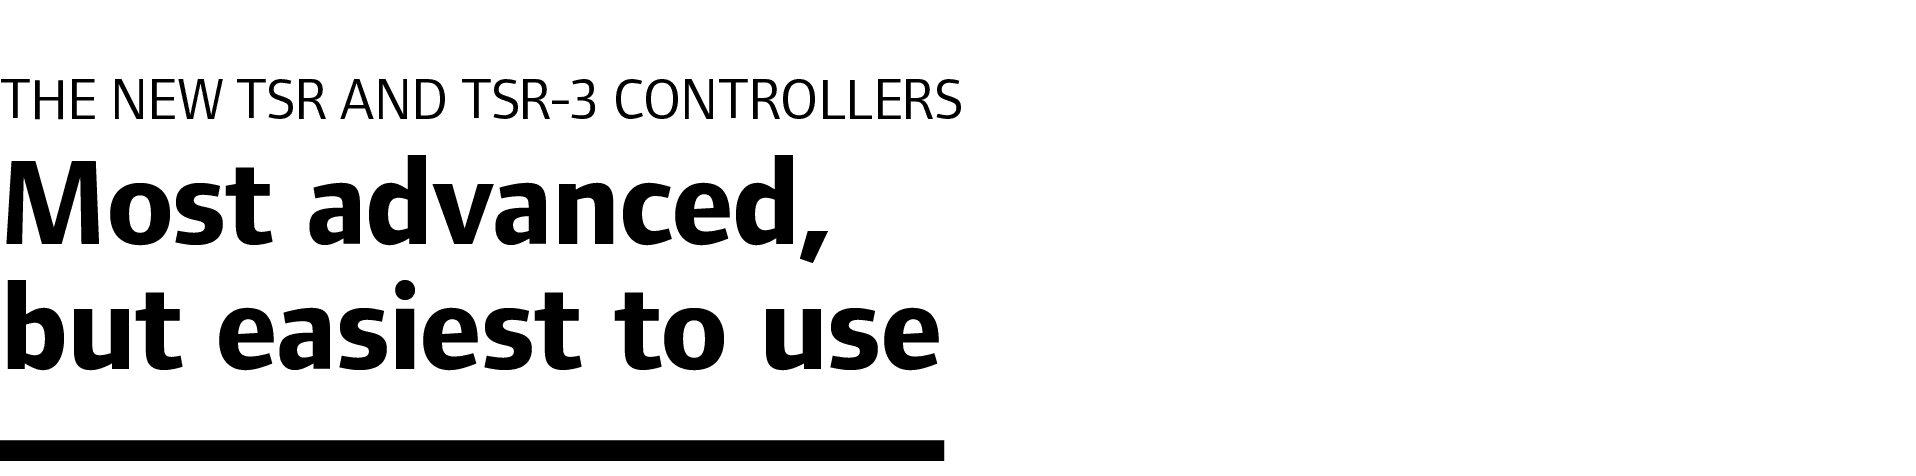 The new TSR and TSR-3 controllers Most advanced, but easiest to use